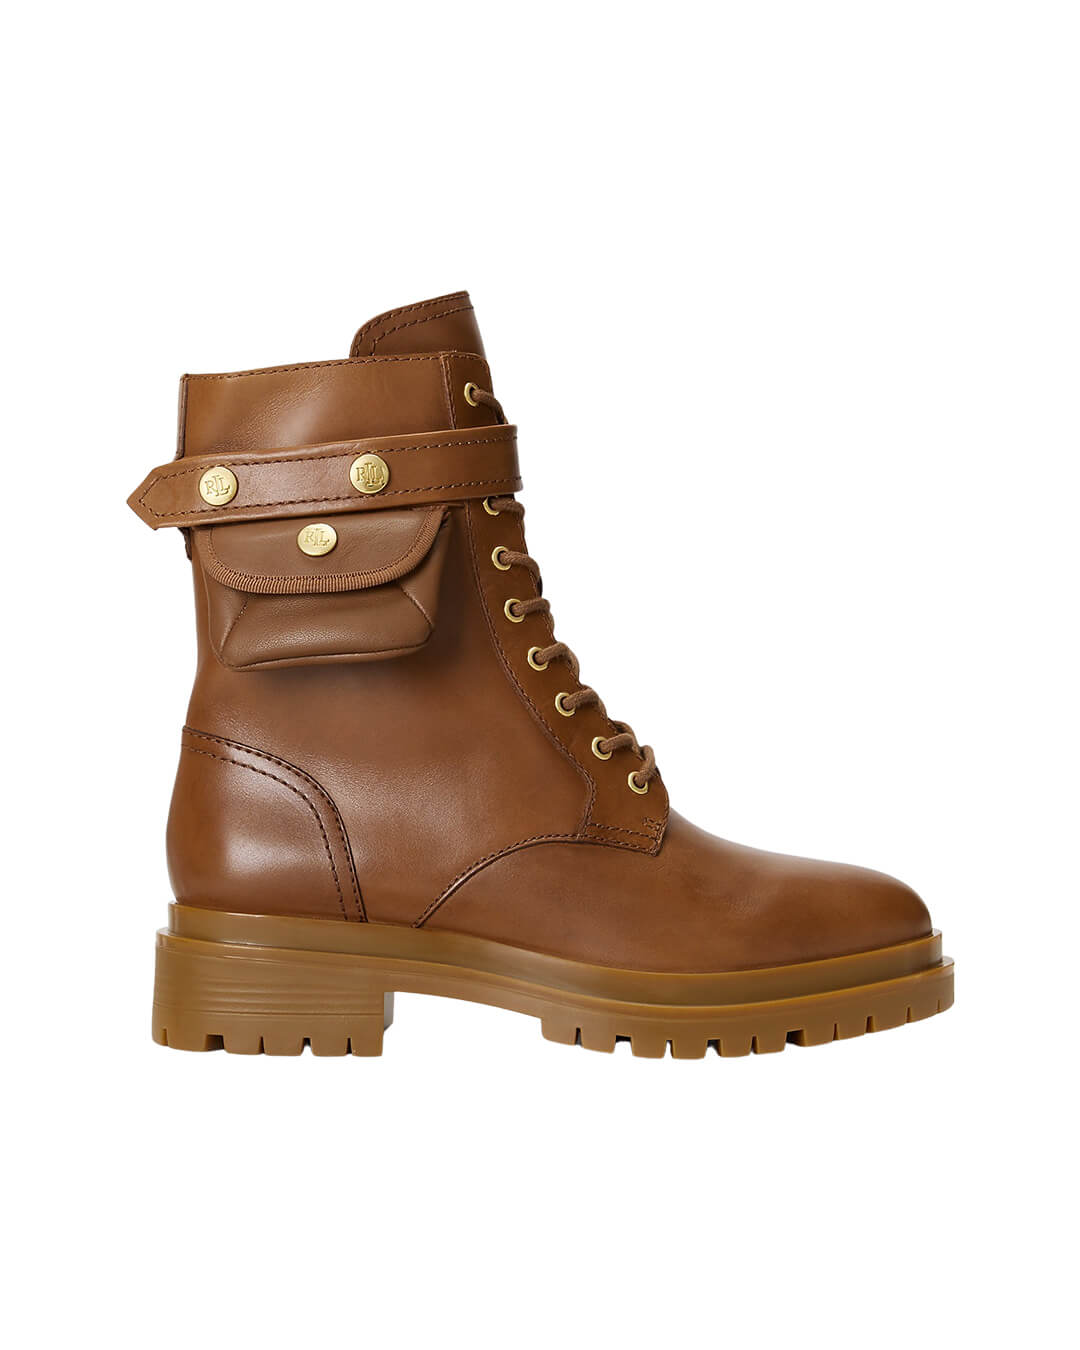 Lauren By Ralph Lauren Shoes CAMMIE-BOOTS-MID BOOT DEEP SADDLE TANAW23